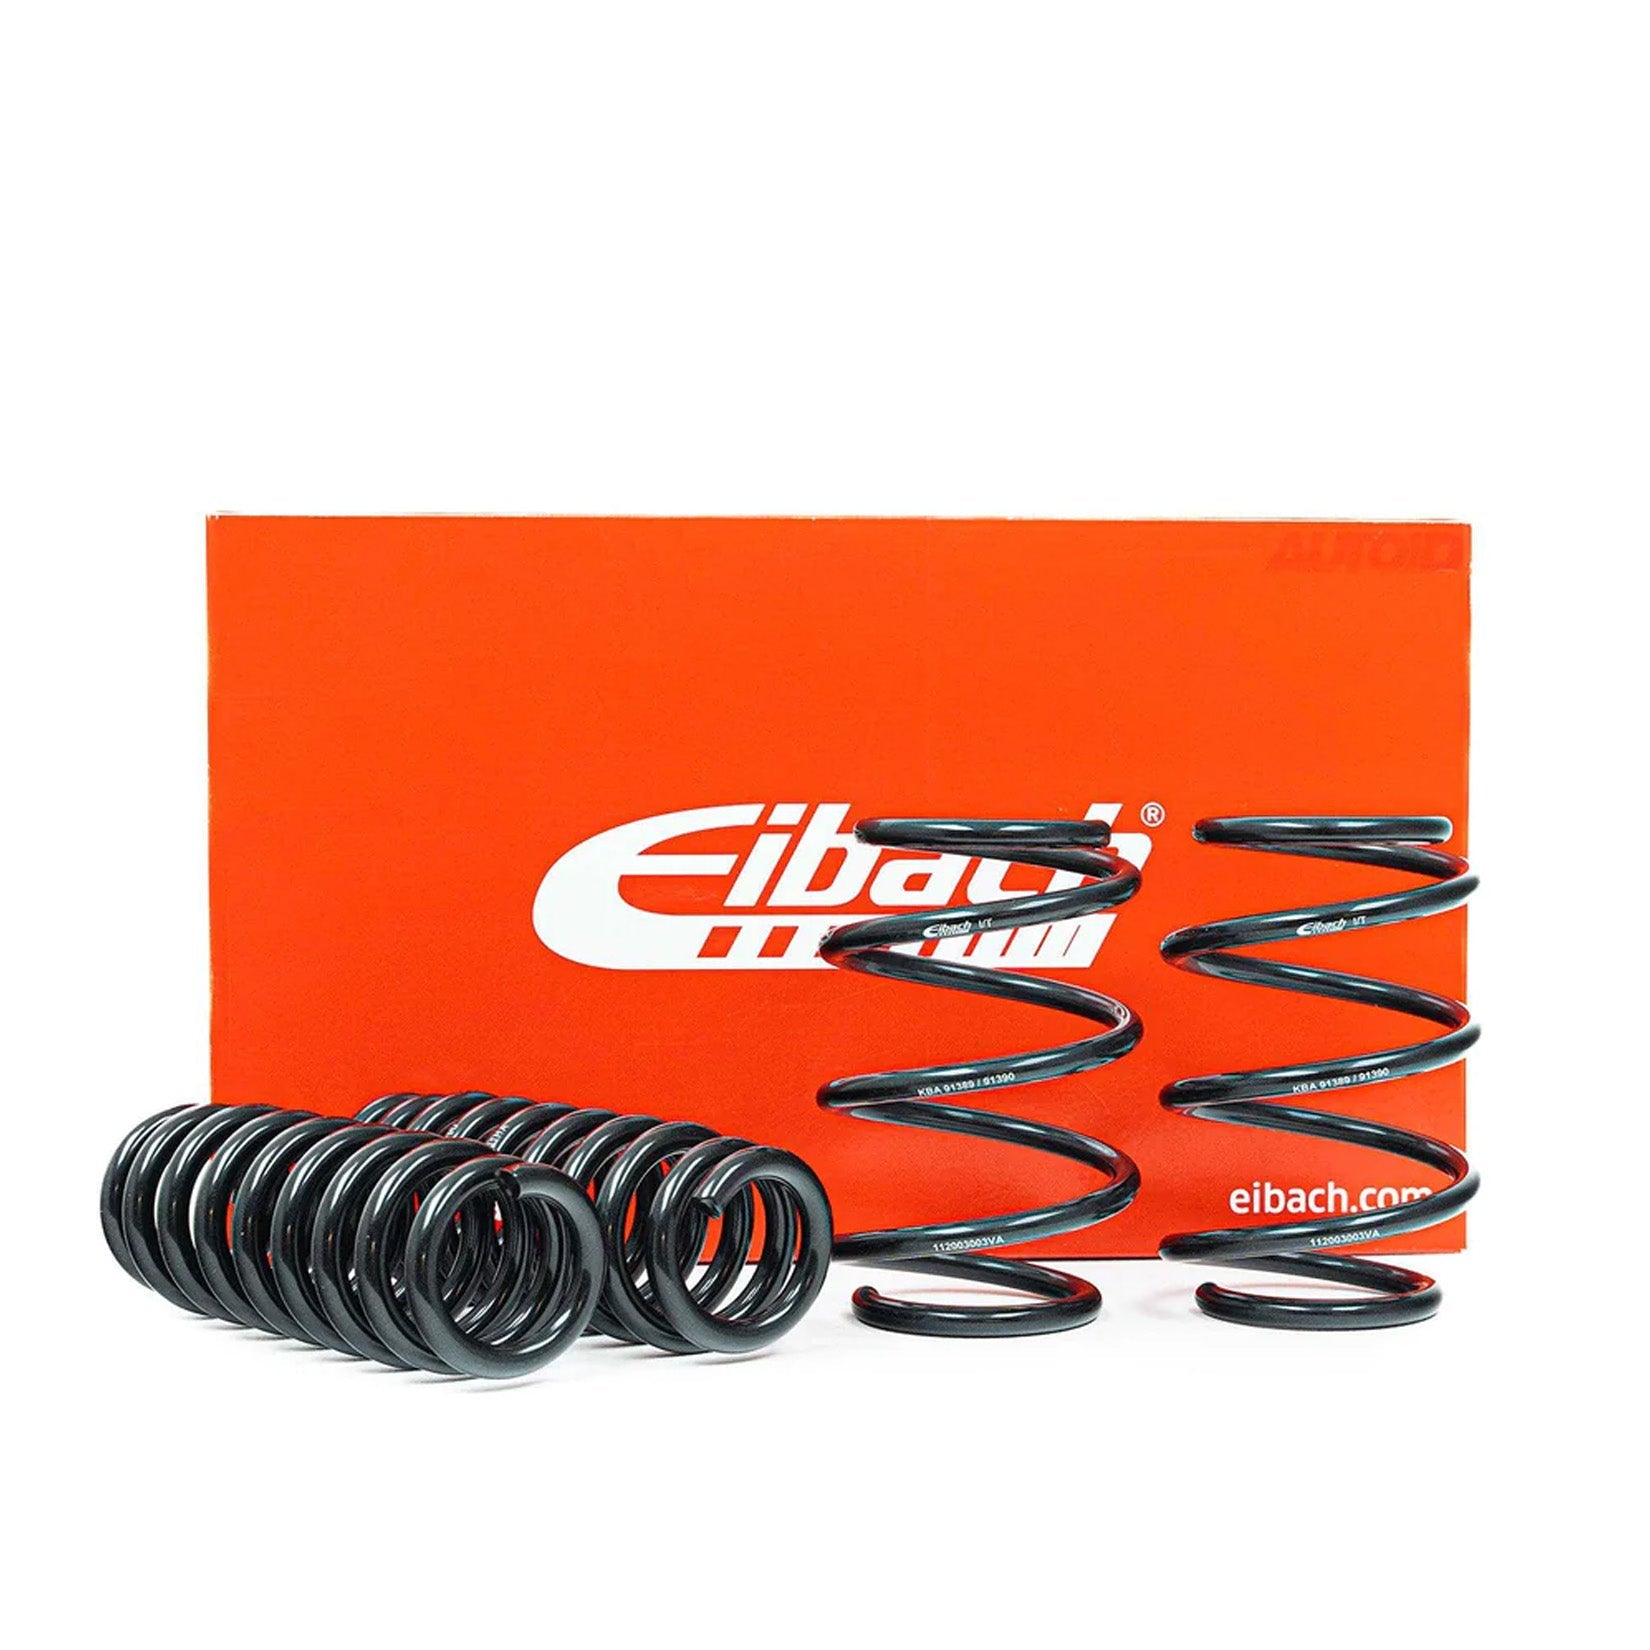 BMW 1 Series F40 2019+ Eibach Pro-Kit Lowering Springs for 116d/118d/120d/120i/128ti